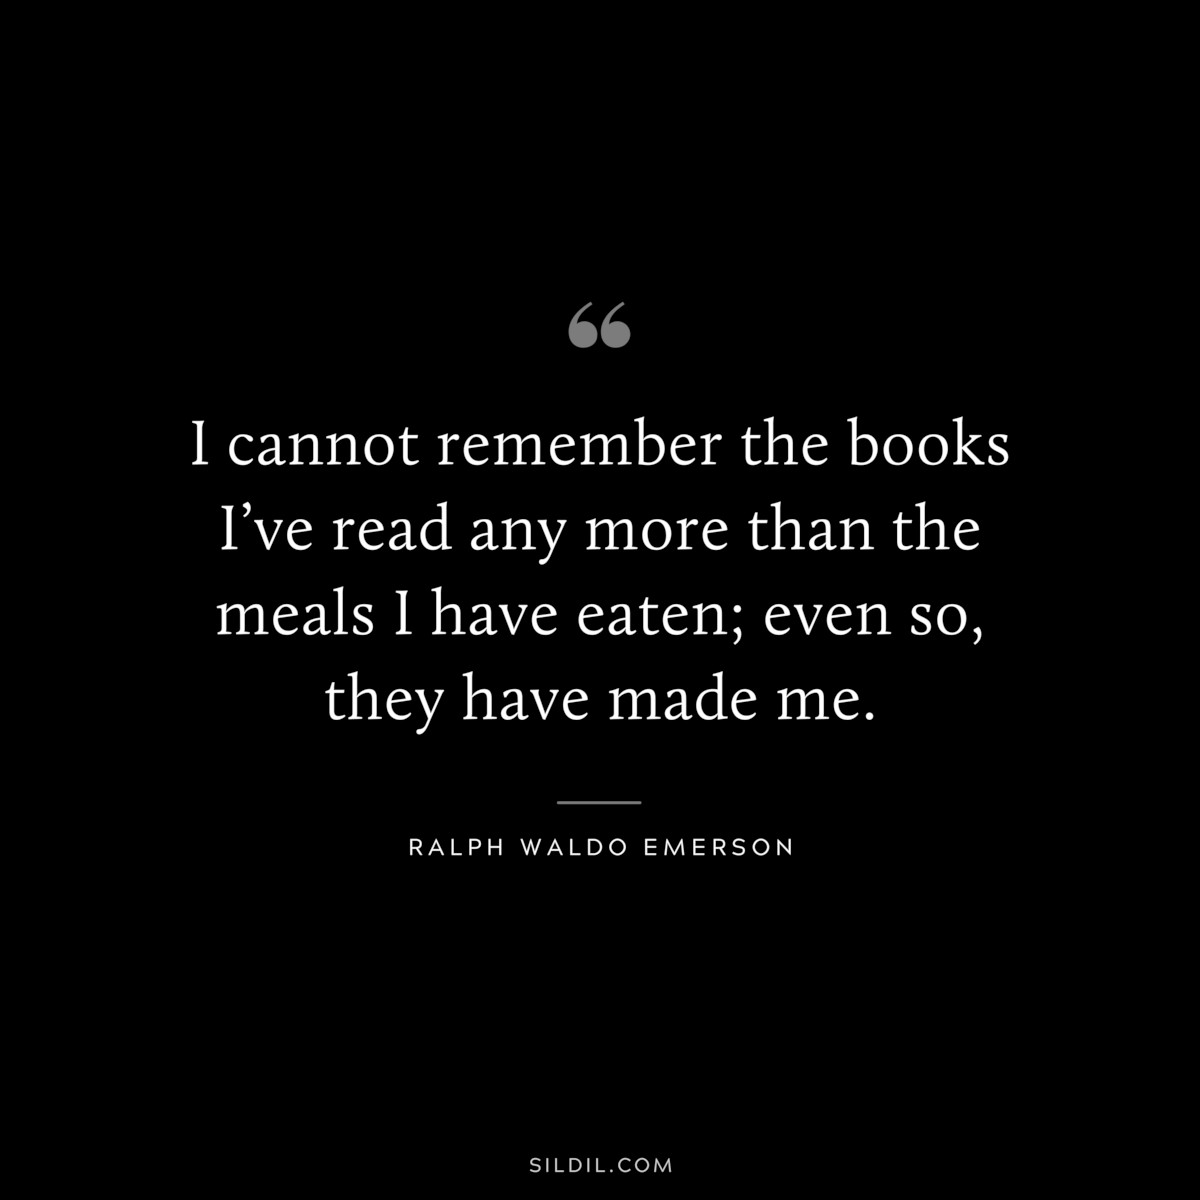 I cannot remember the books I’ve read any more than the meals I have eaten; even so, they have made me. — Ralph Waldo Emerson